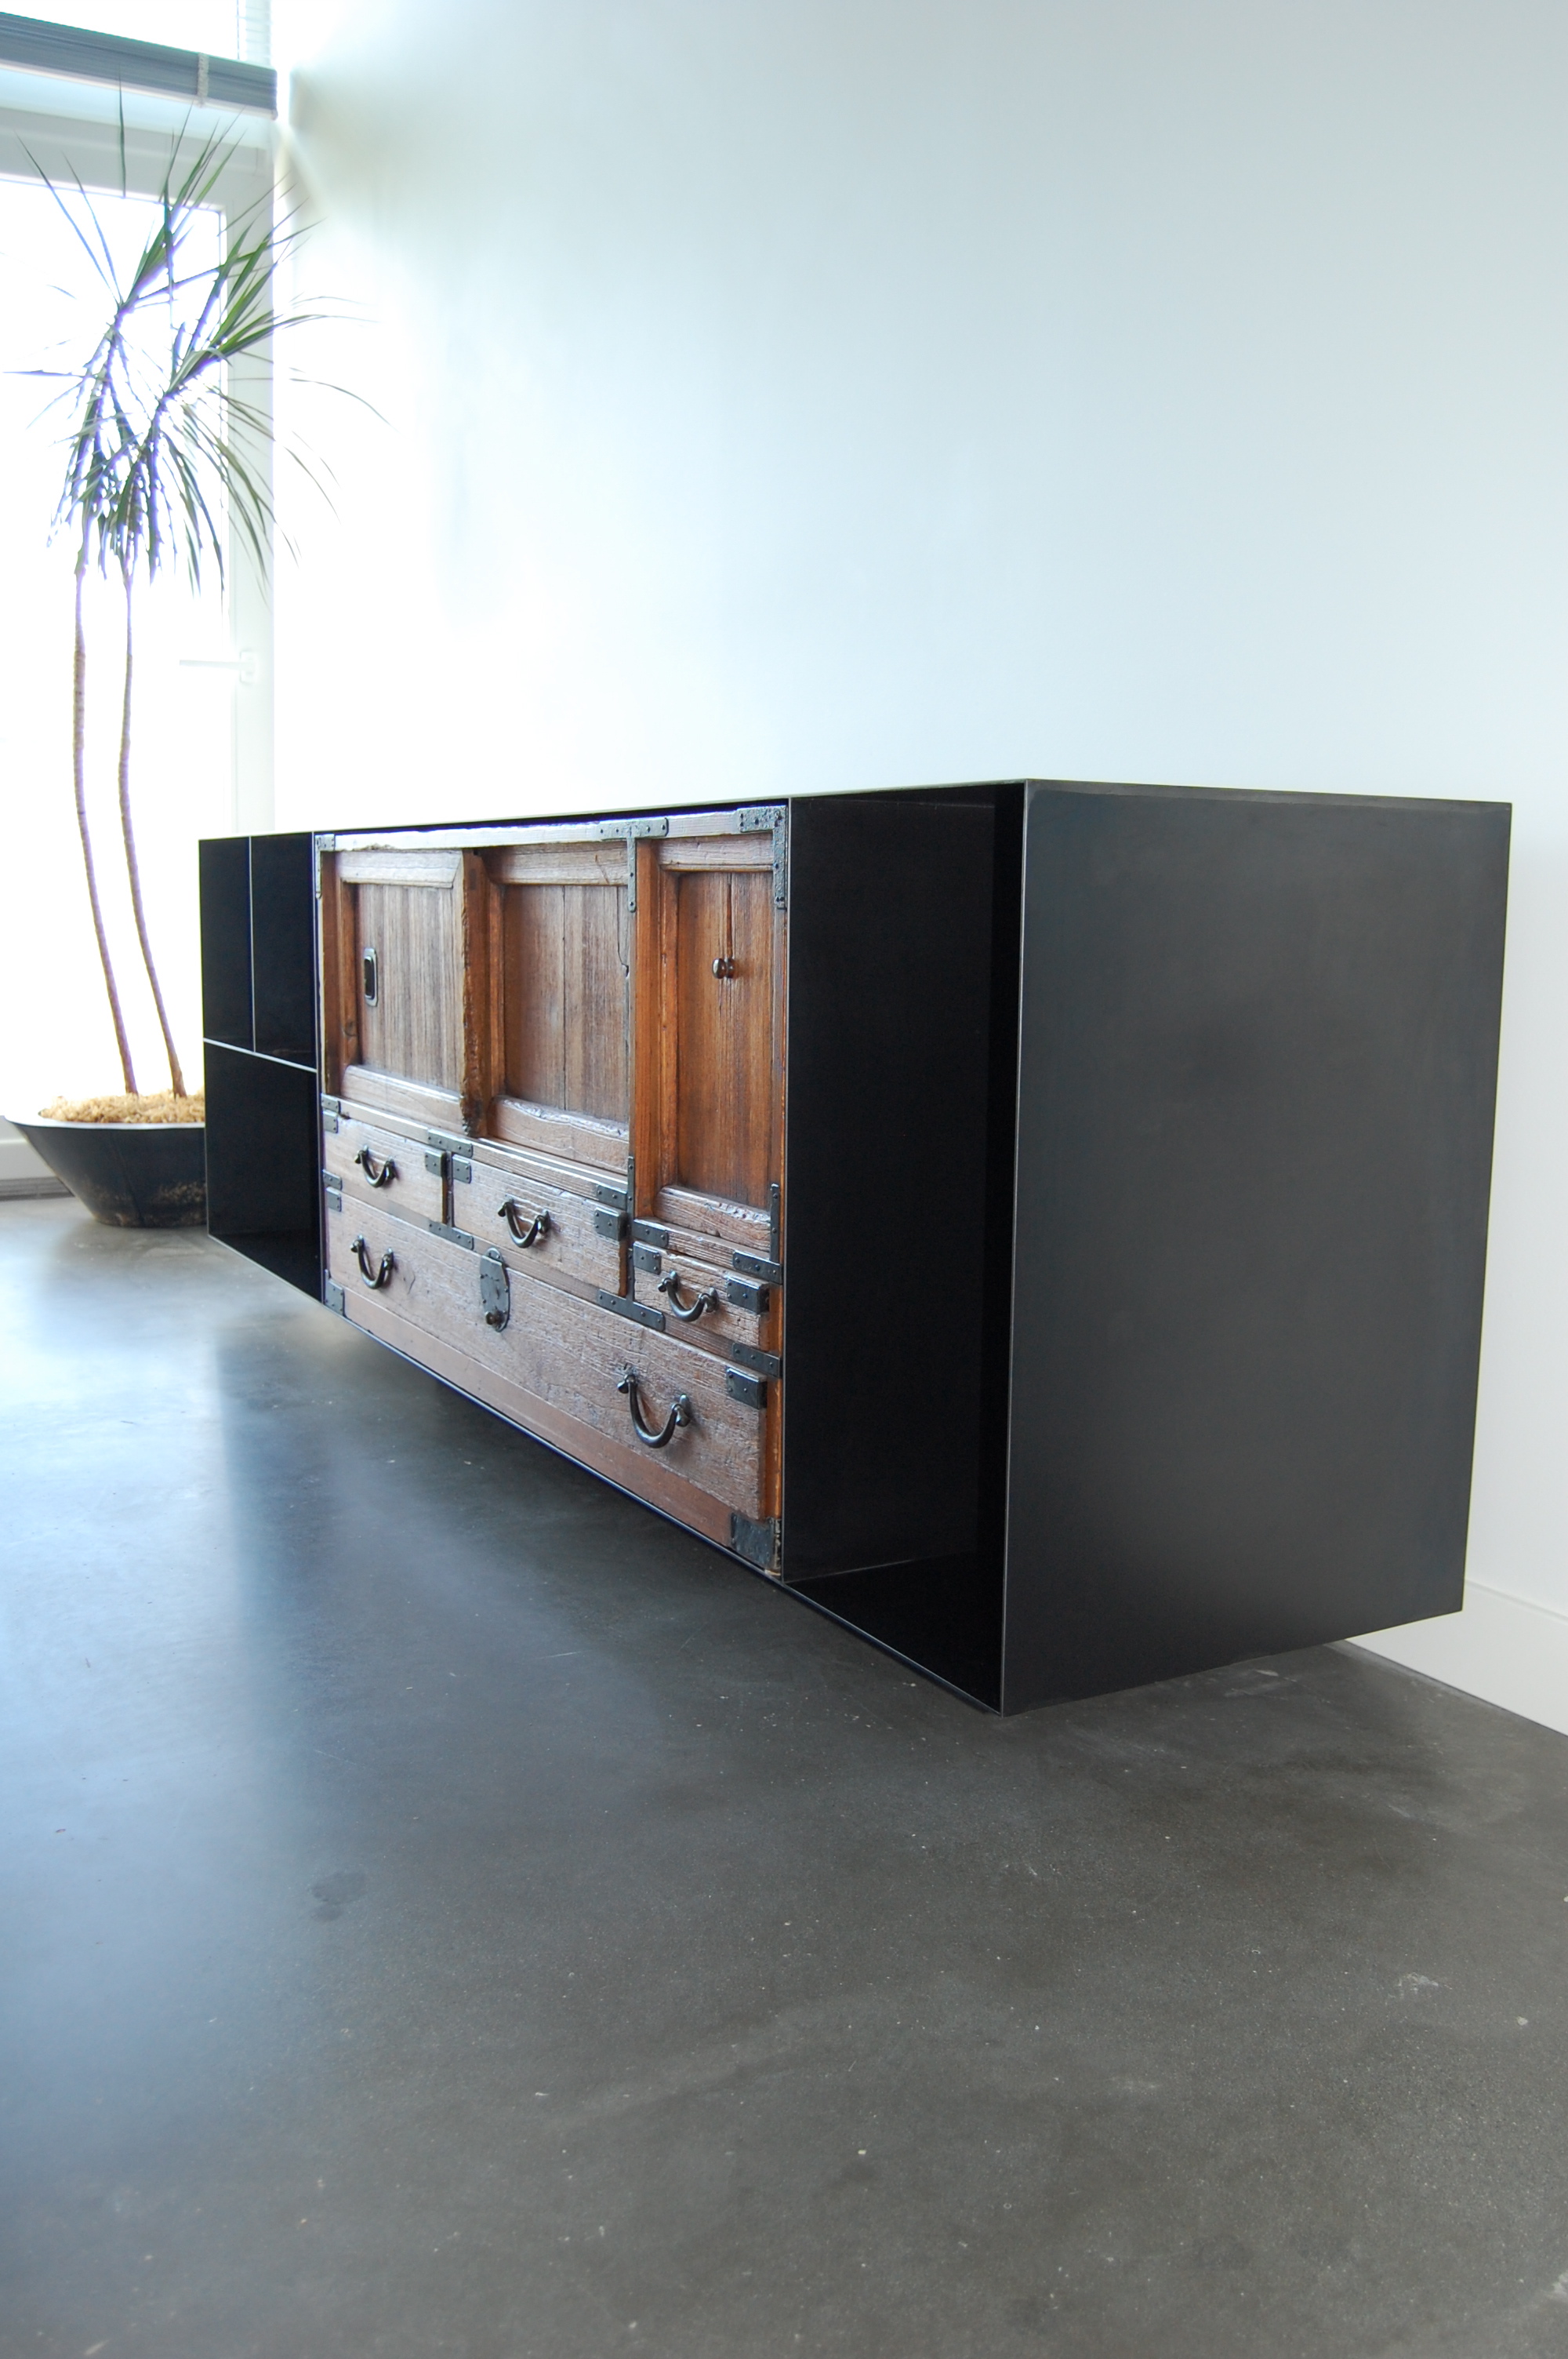  Hot Rolled Steel cabinet that was specifically designed to house an antique Tansu Cabinet.  Designed by Eggleston/Farkas Architects 